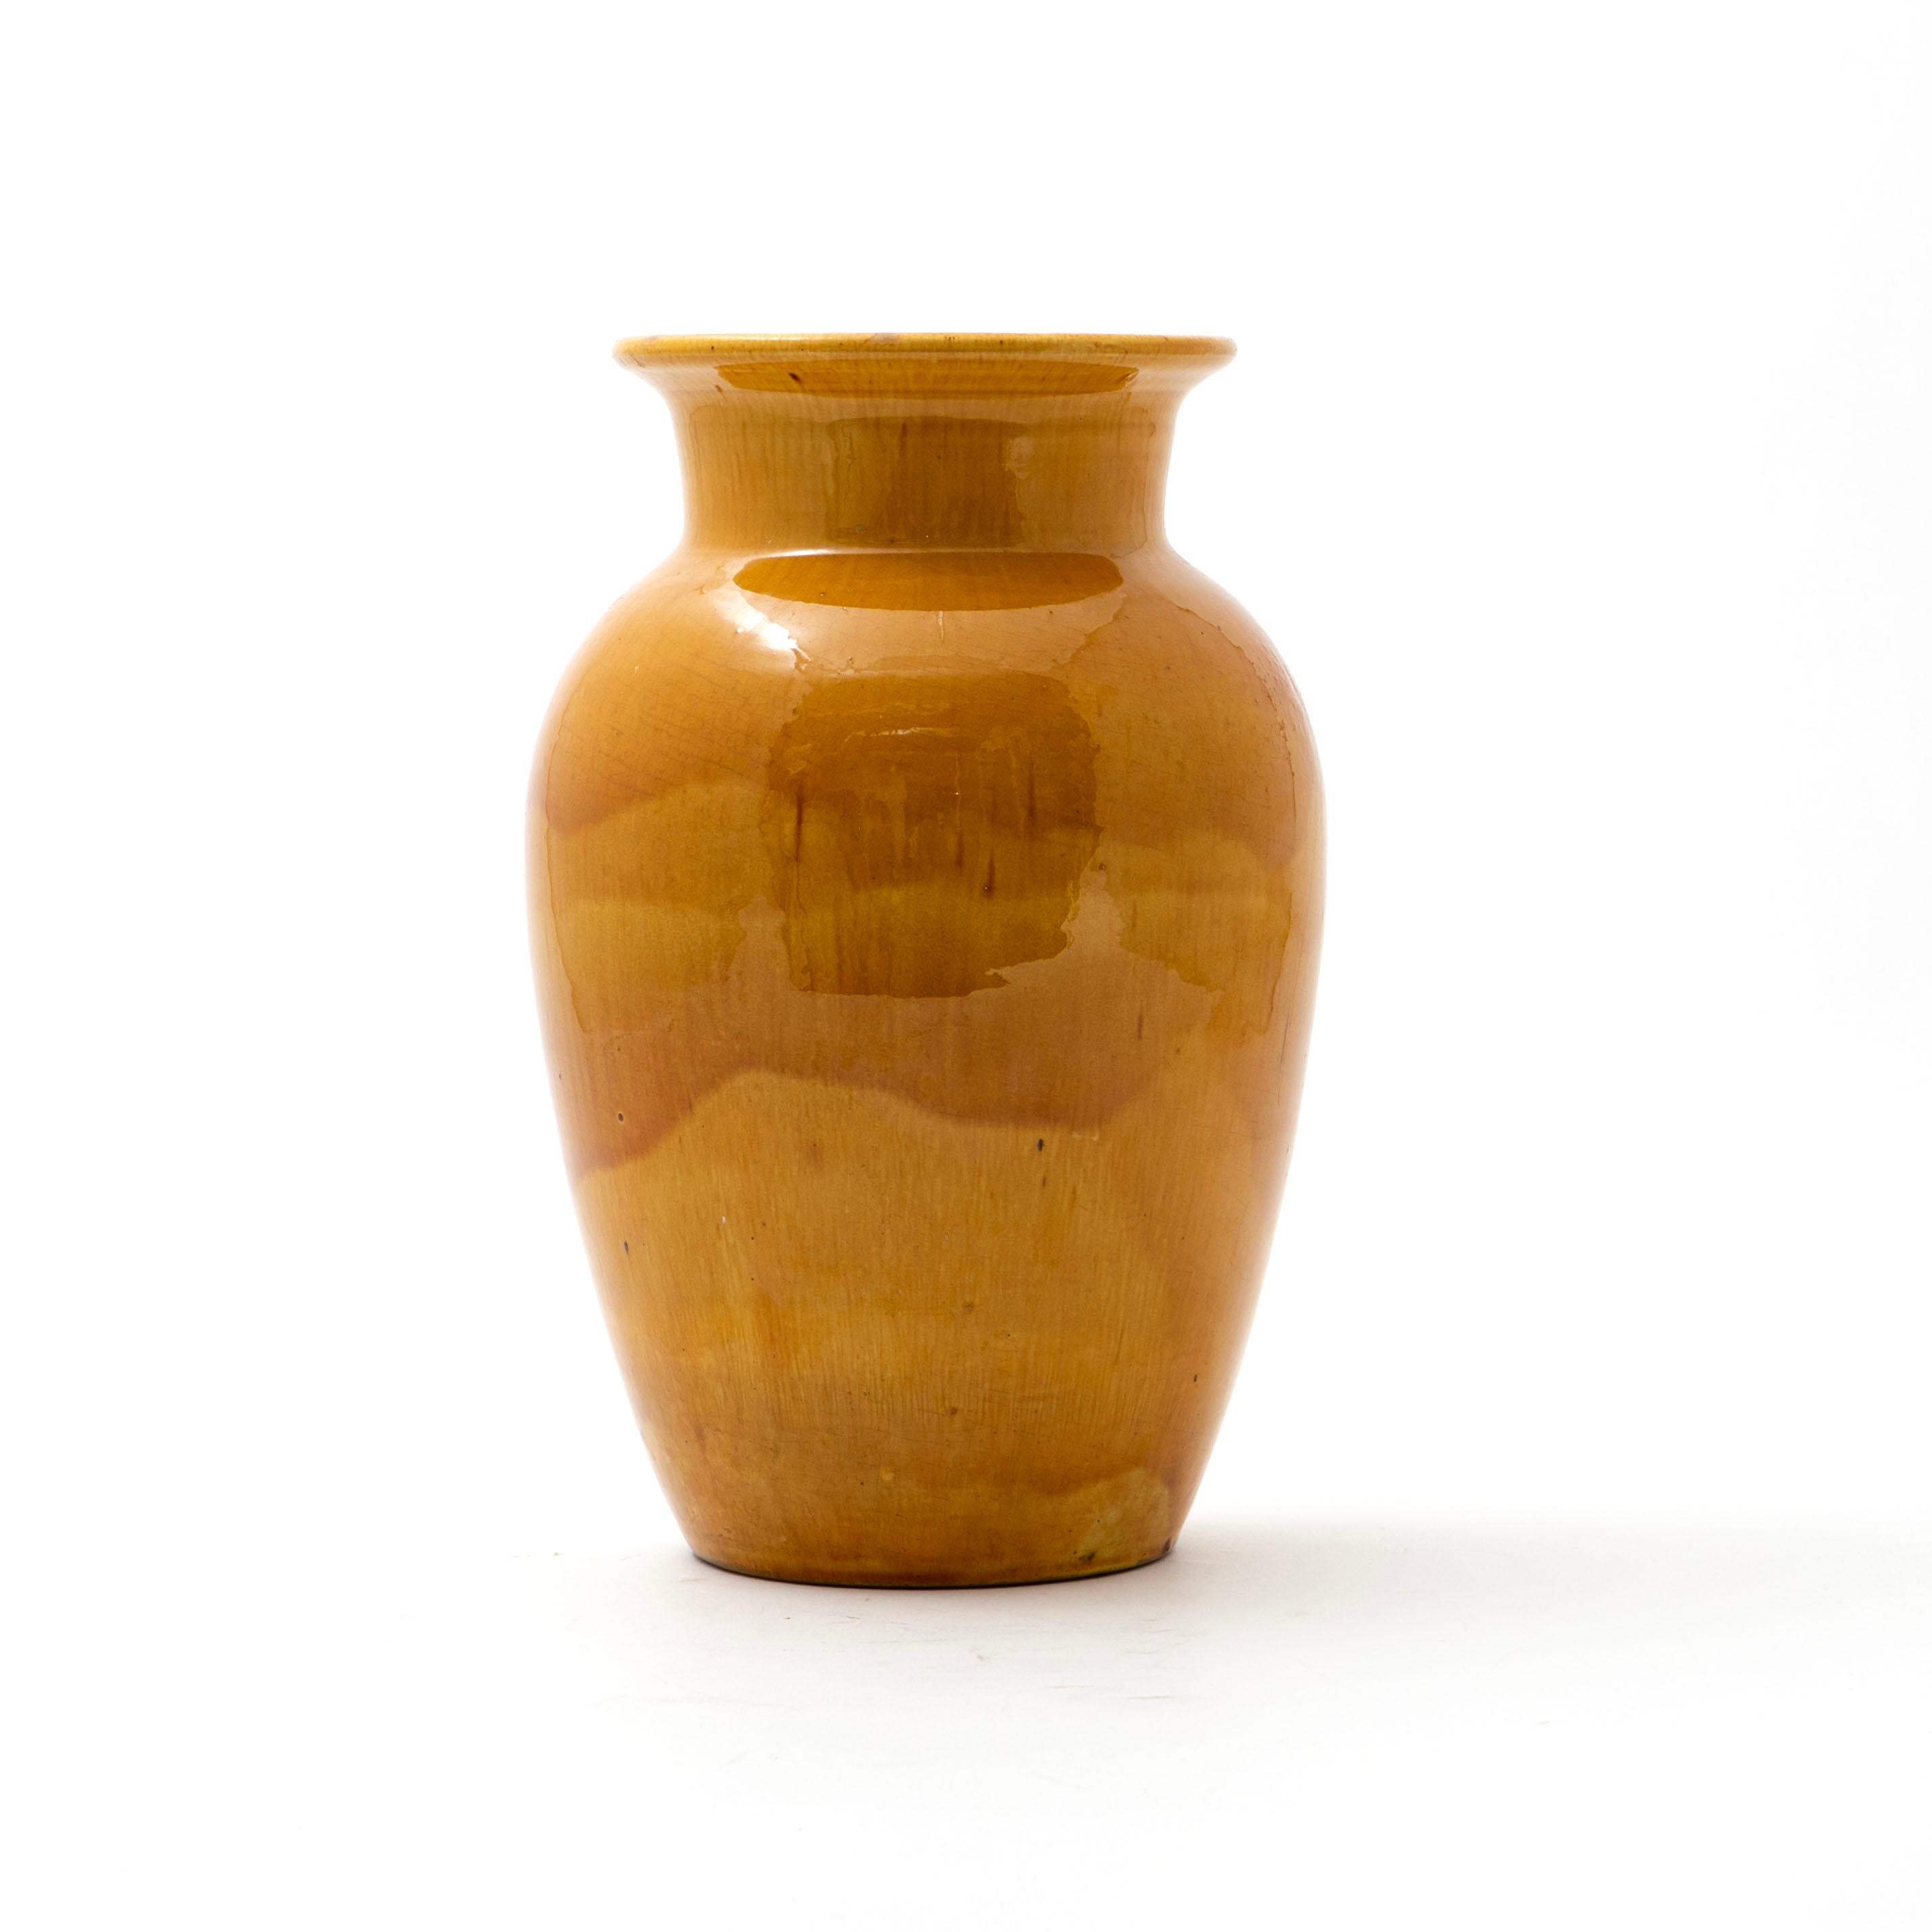 Kähler vase in stoneware decorated with a beautiful sun-yellow glaze.
Height: 31 cm.

The vase carries a unique touch with a darker spot that is not a flaw but an part of the glazing process.
Unsigned